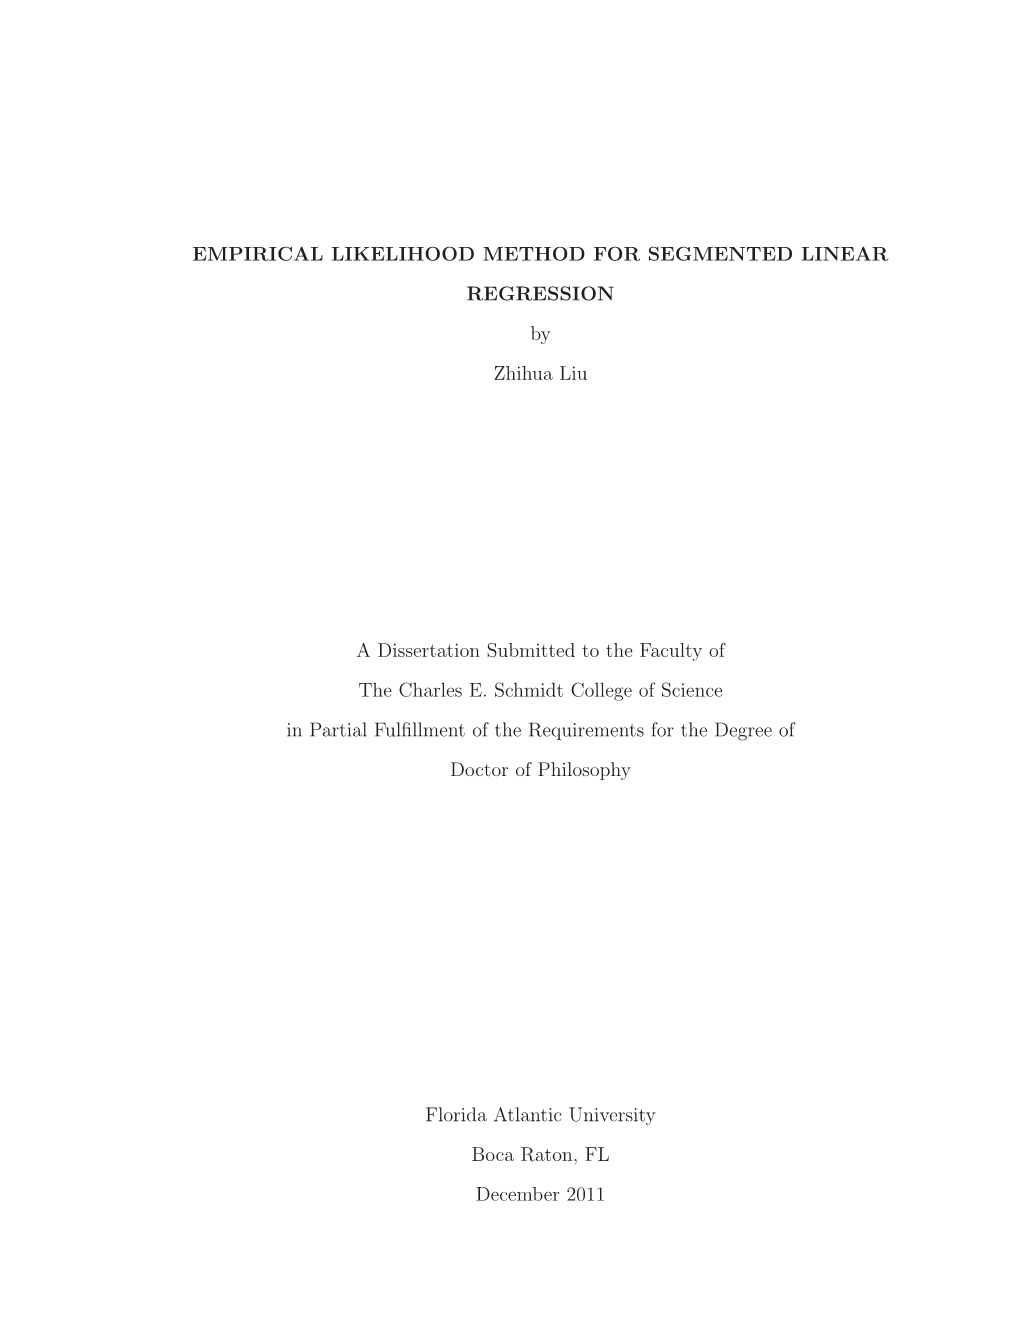 EMPIRICAL LIKELIHOOD METHOD for SEGMENTED LINEAR REGRESSION by Zhihua Liu a Dissertation Submitted to the Faculty of the Charles